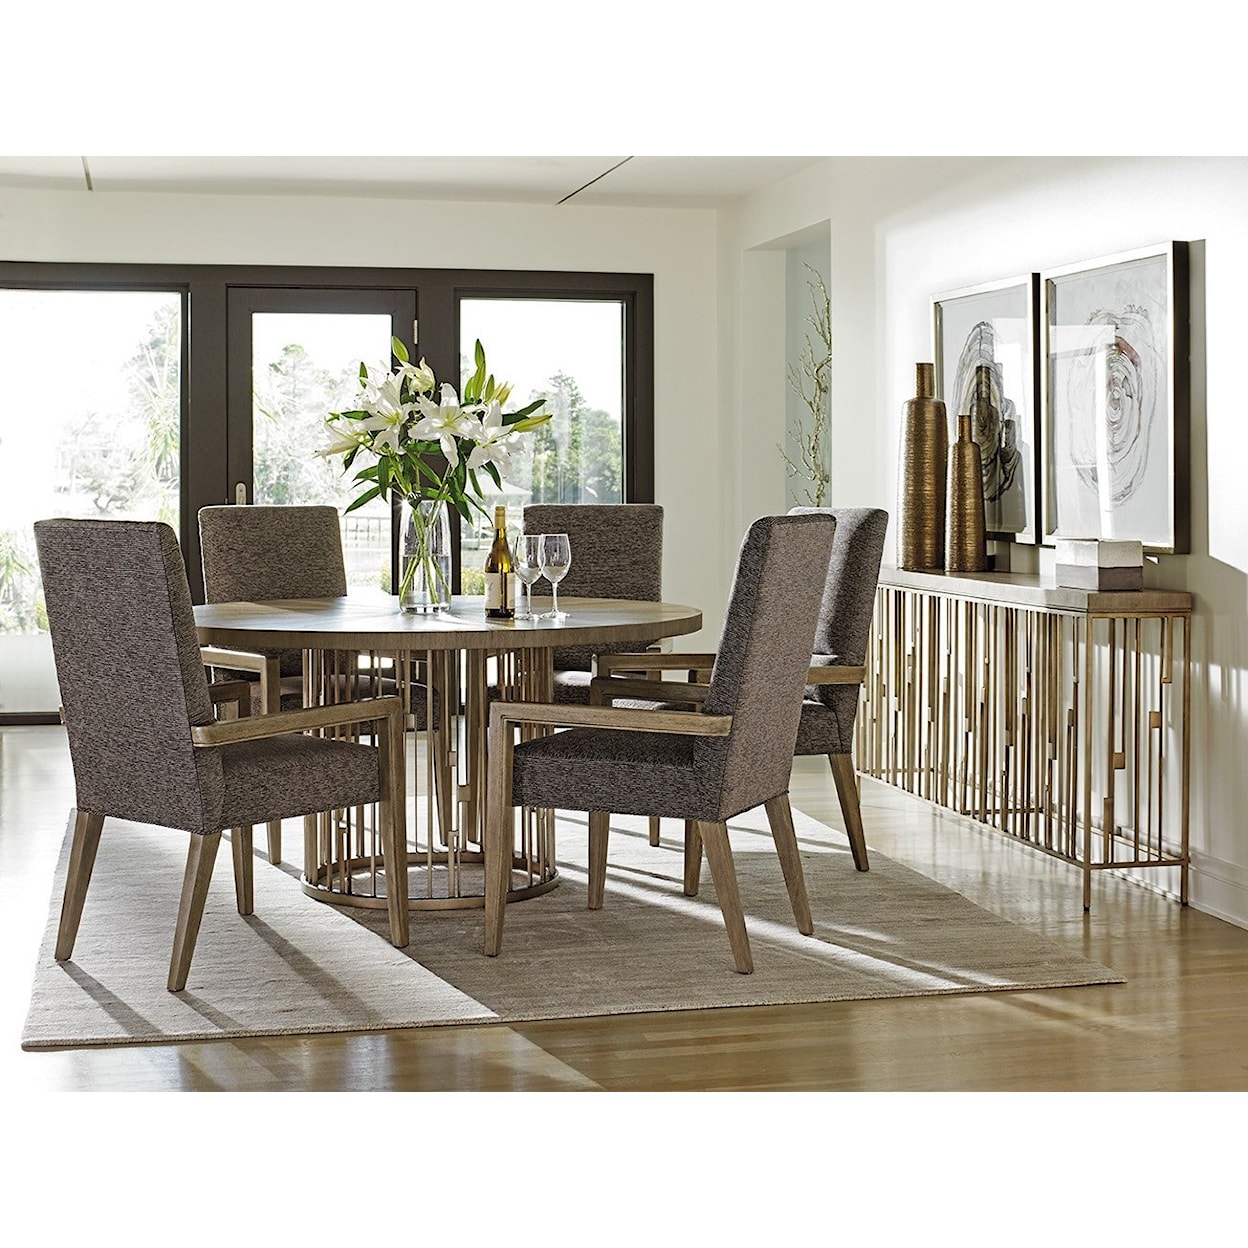 Lexington Shadow Play Rendezvous Round Dining Table